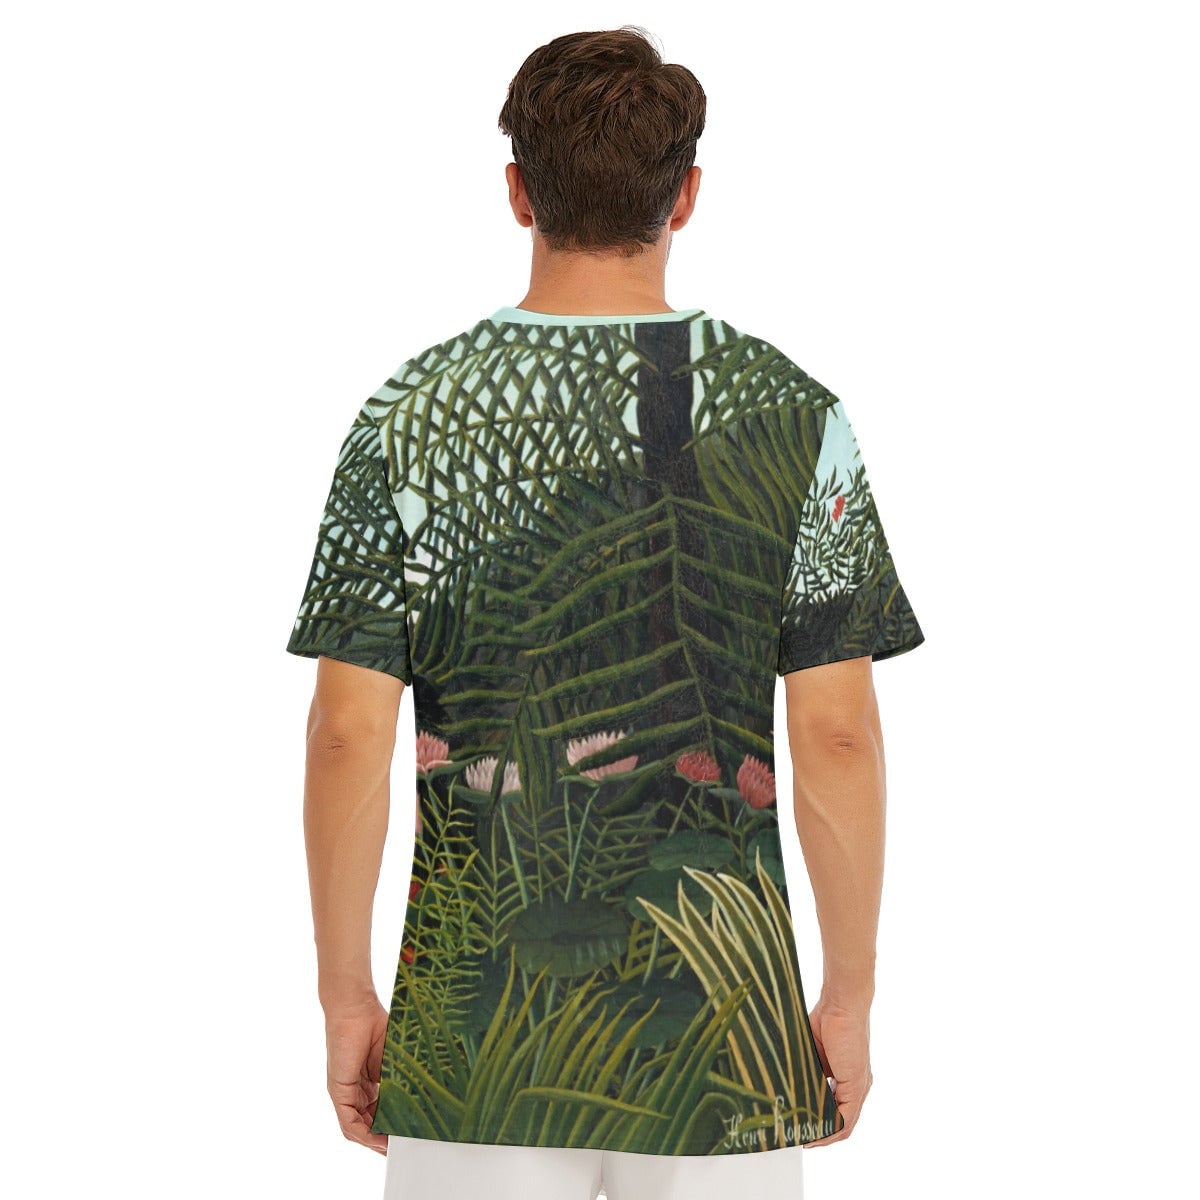 Henri Rousseau’s Virgin Forest with Sunset T-Shirt